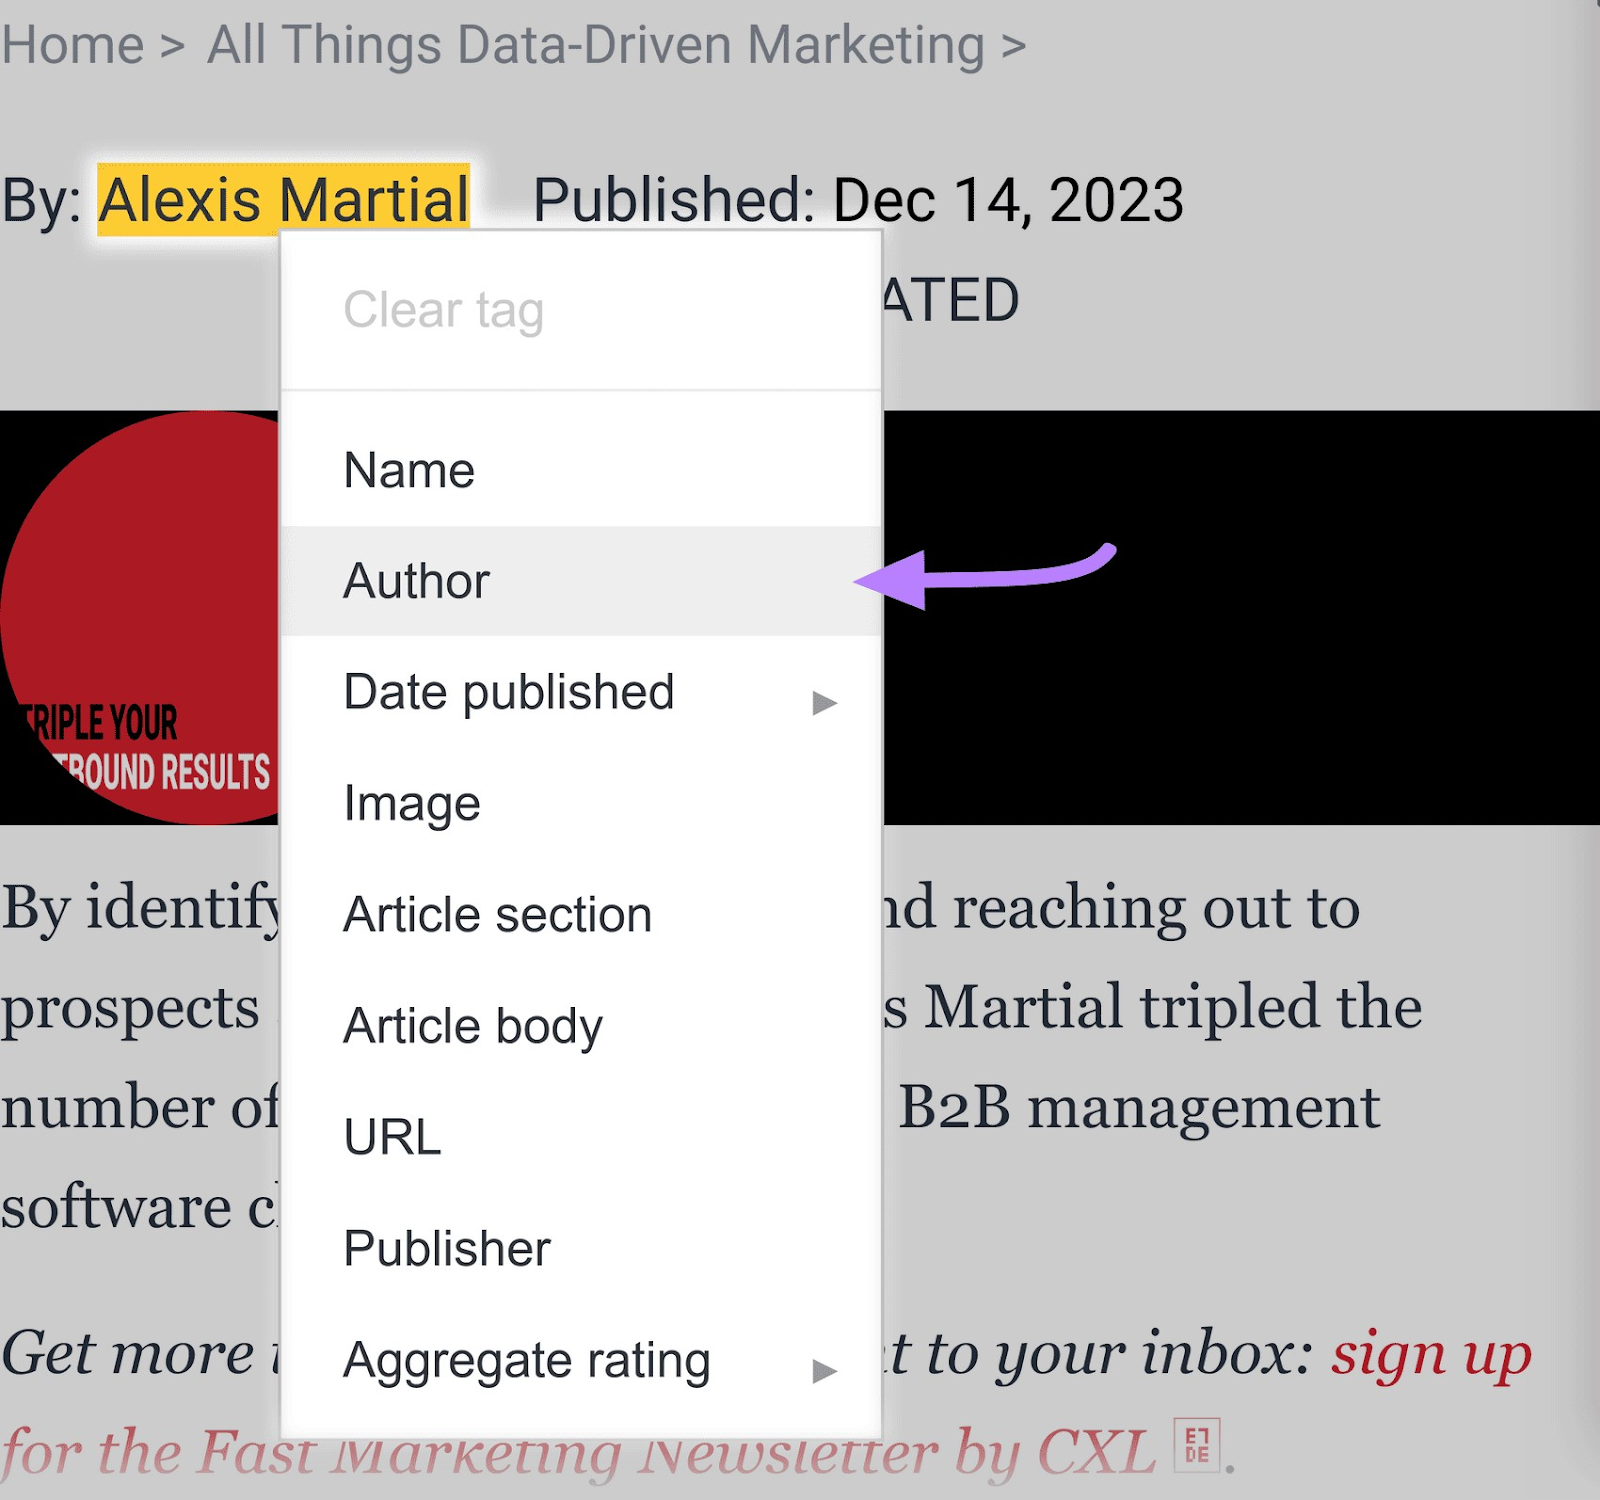 Selecting “Author” data item for the article's author